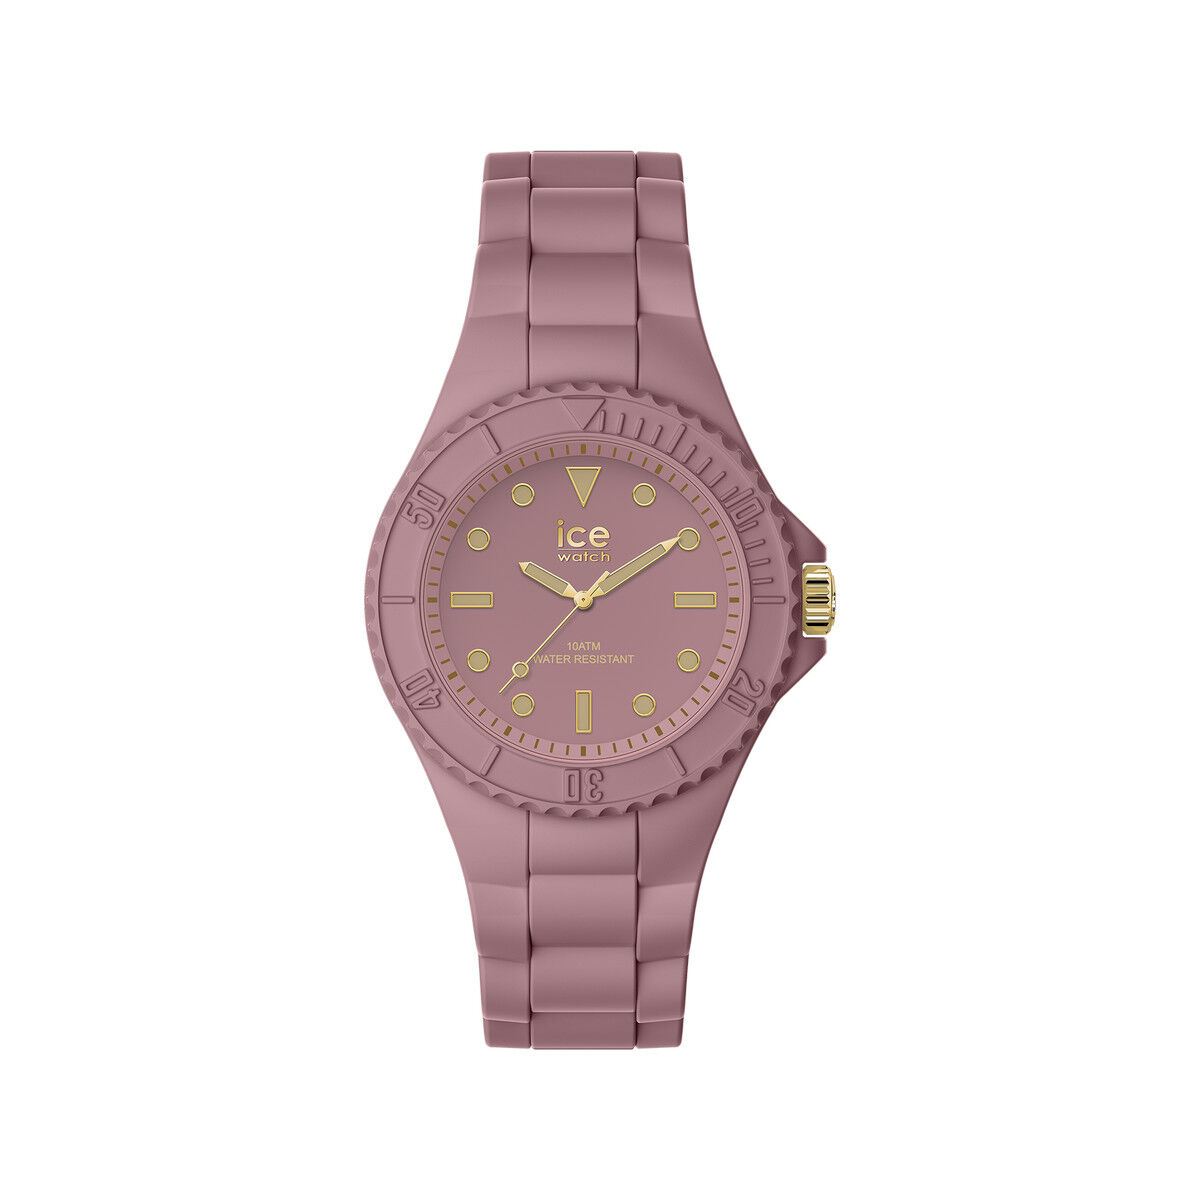 Ice-Watch ICE WATCH Montre Ice Watch Femme silicone rose pÃ¢le- MATY